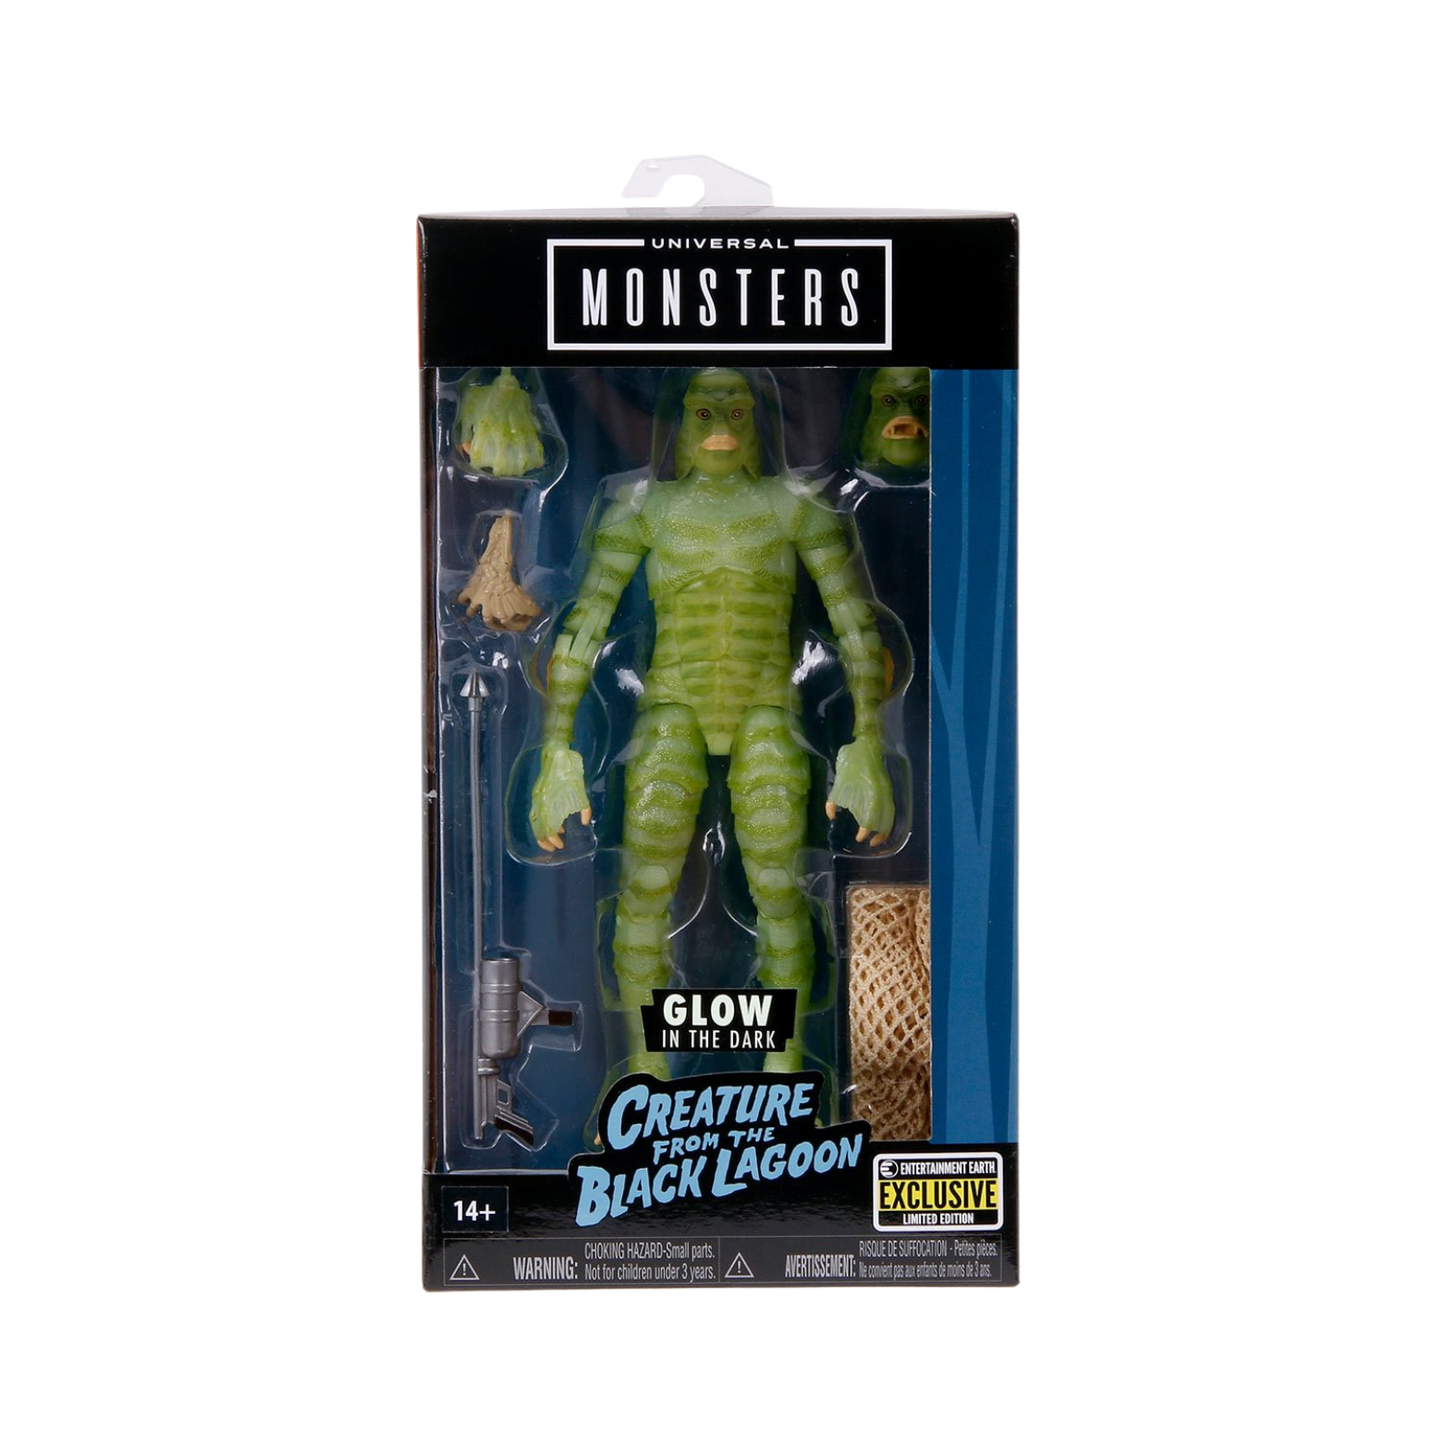 Universal Monsters Creature from the Black Lagoon Glow-in-the-Dark 6-Inch Action Figure - Entertainment Earth Exclusive